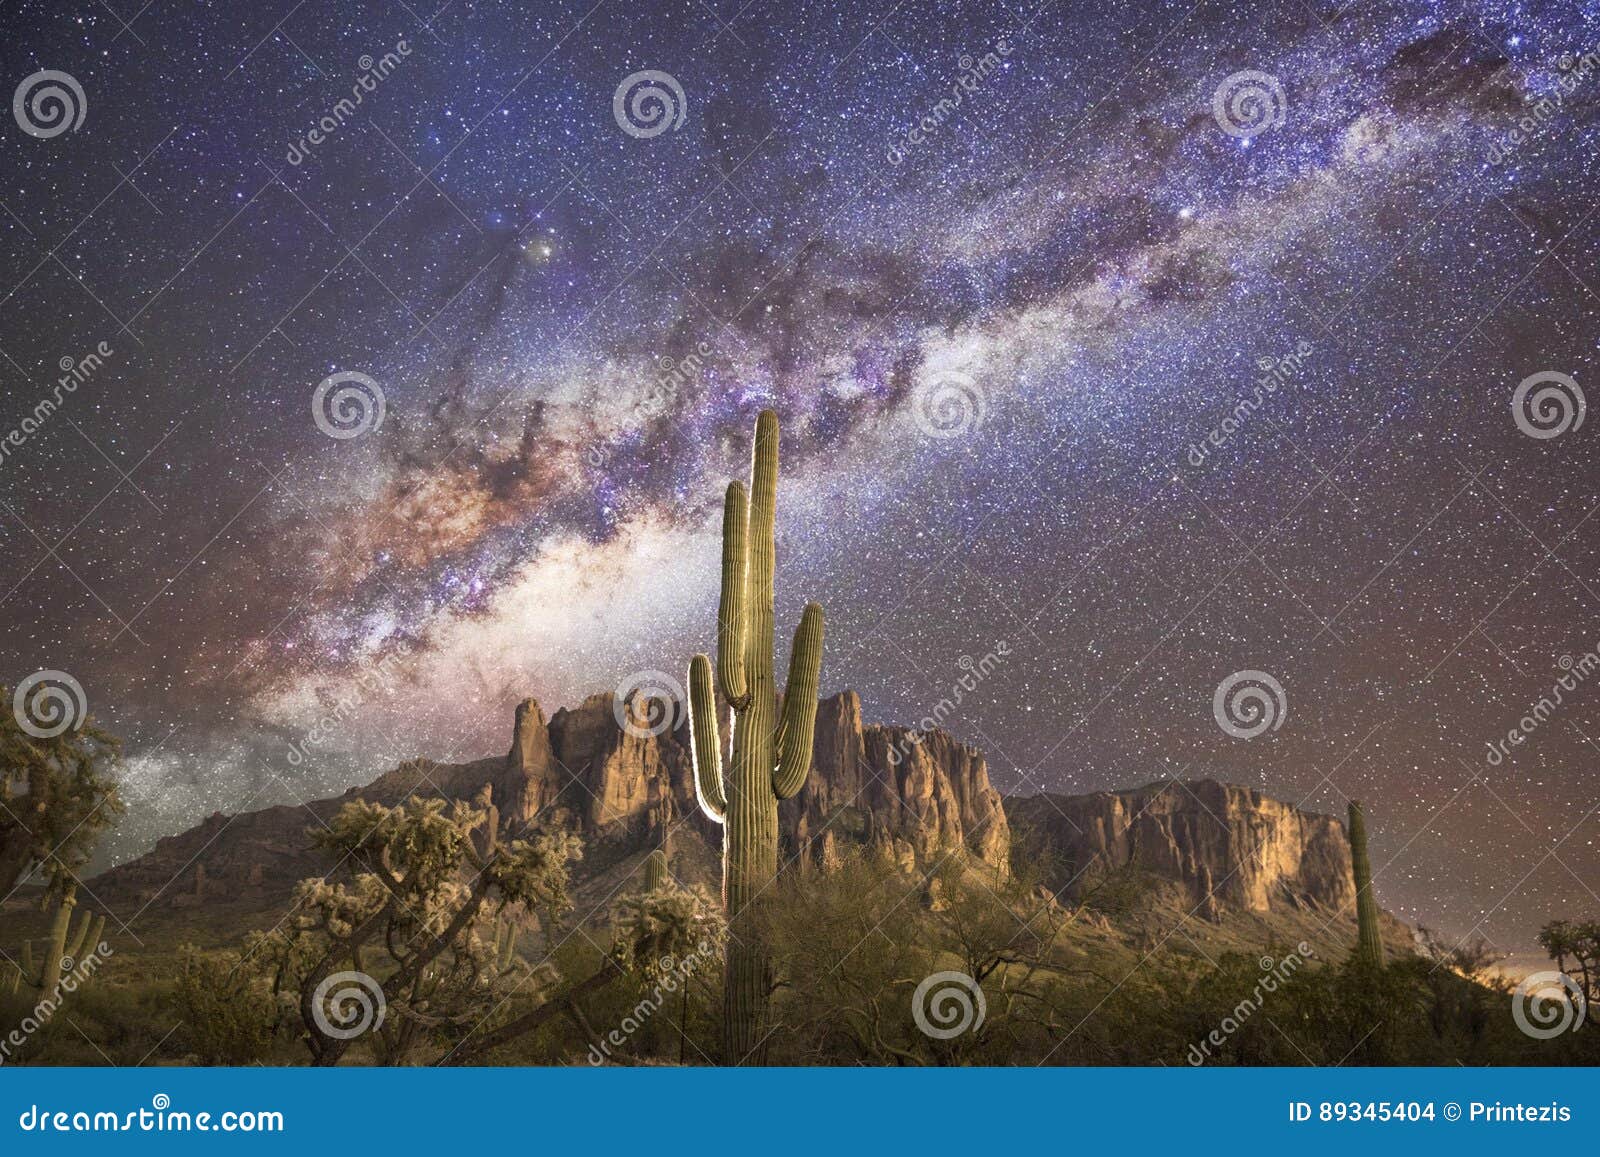 saguaro cactus & the milky way @ superstition mountains